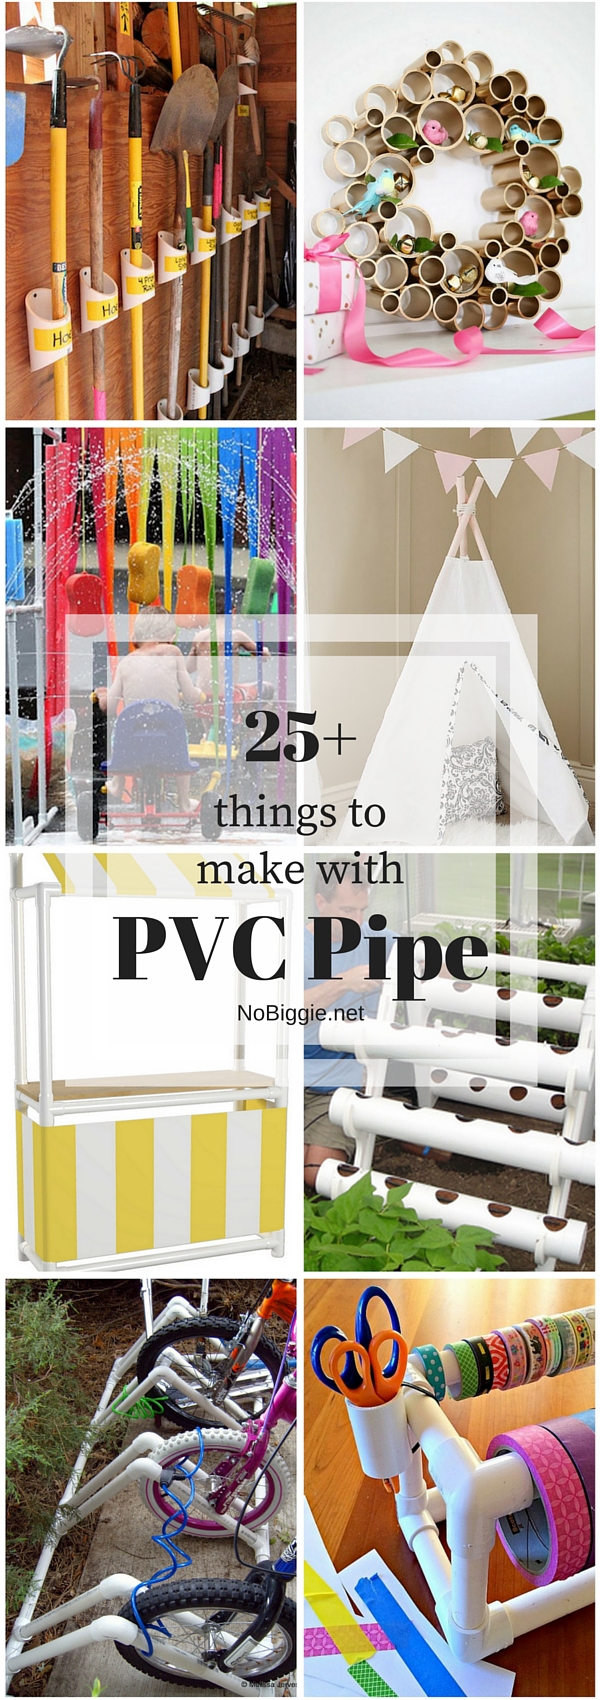 25+ things to make with PVC Pipe | NoBiggie.net